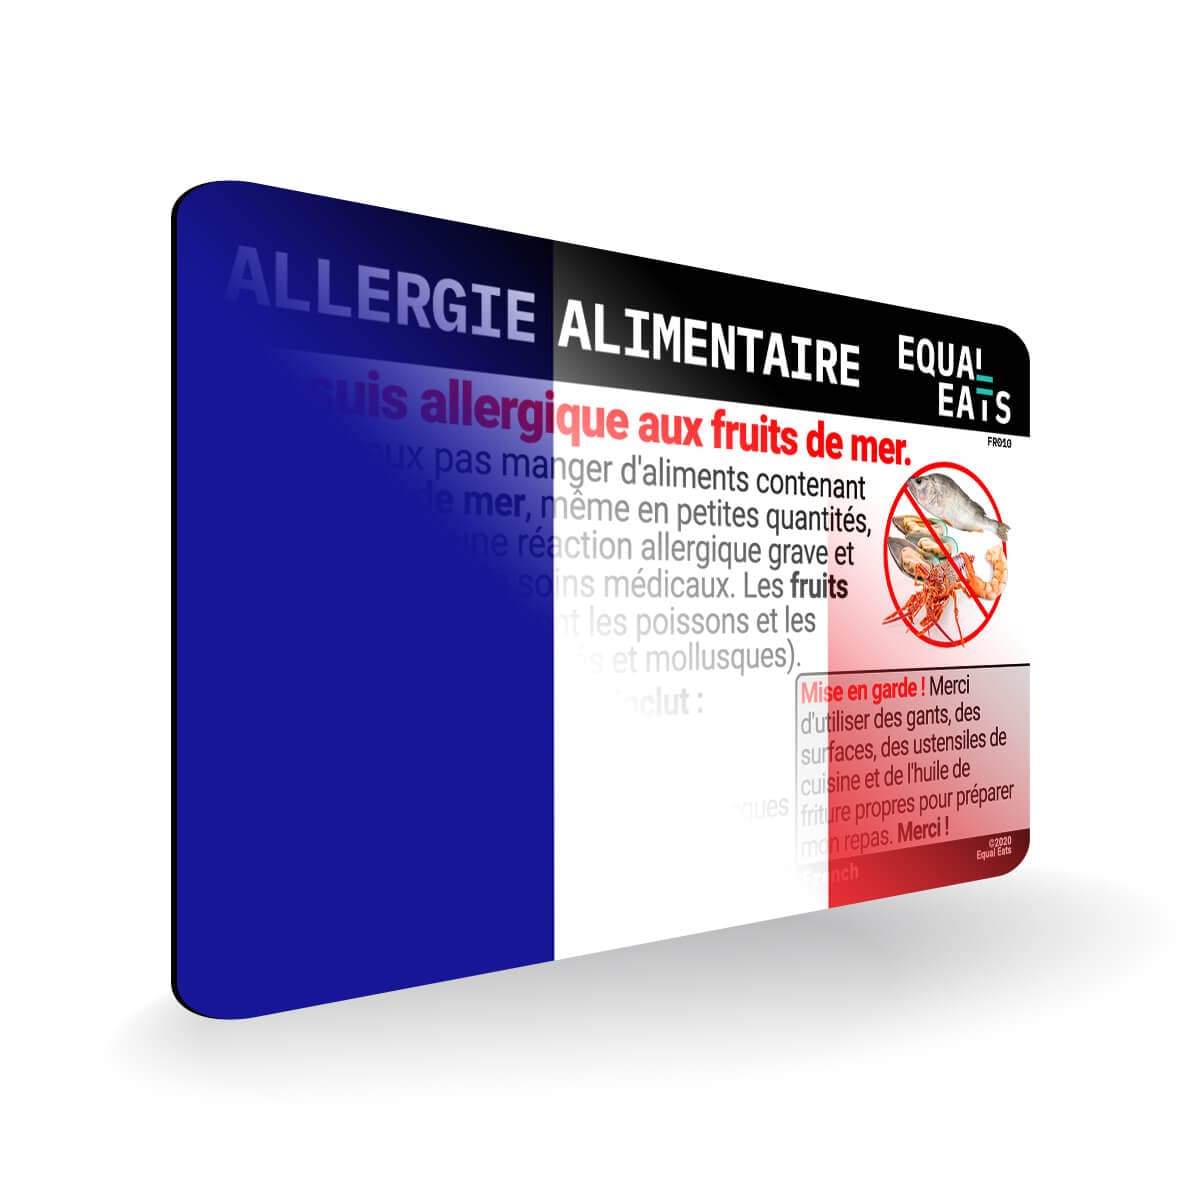 Seafood Allergy in French. Seafood Allergy Card for France